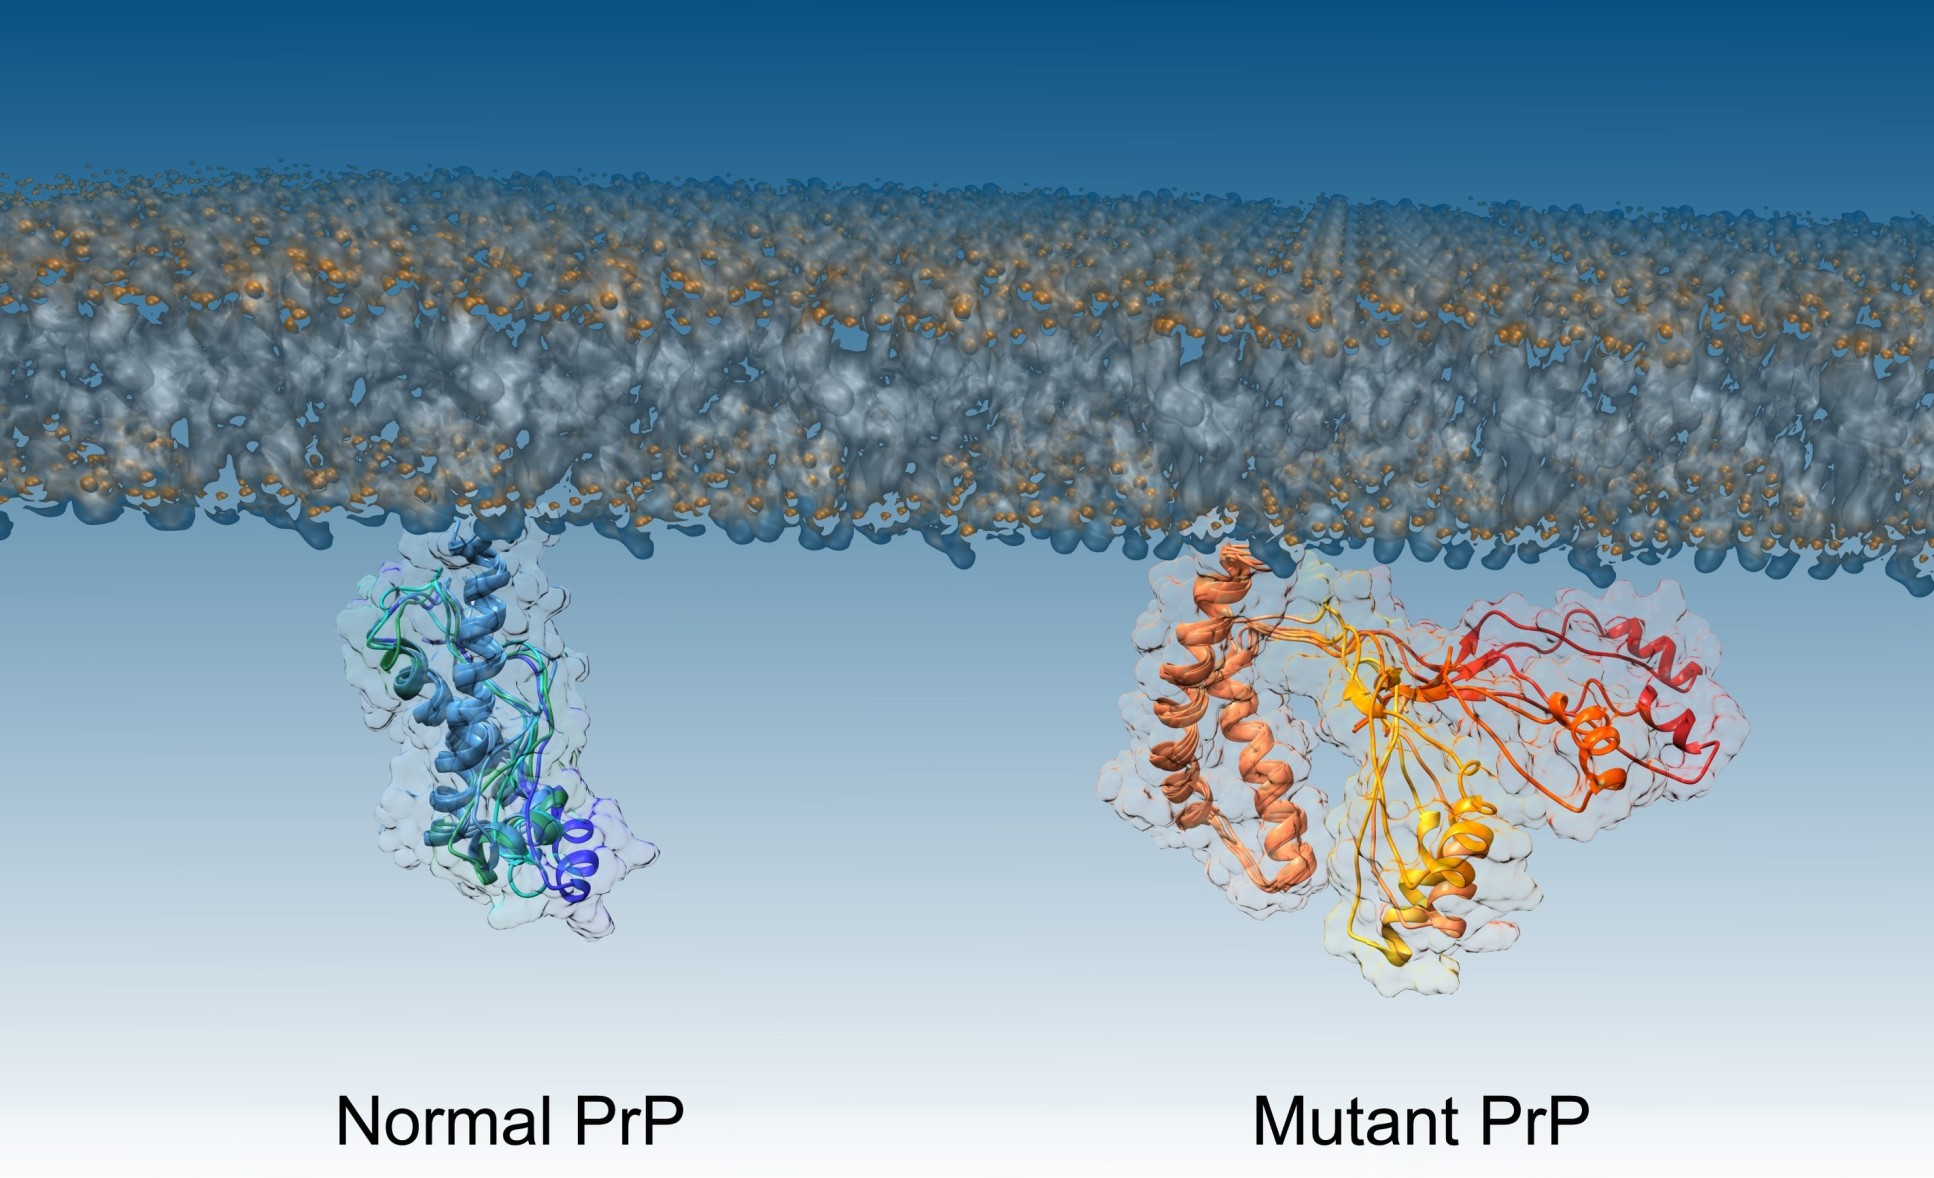 Image showing the clear structural differences between misfolded and healthy proteins